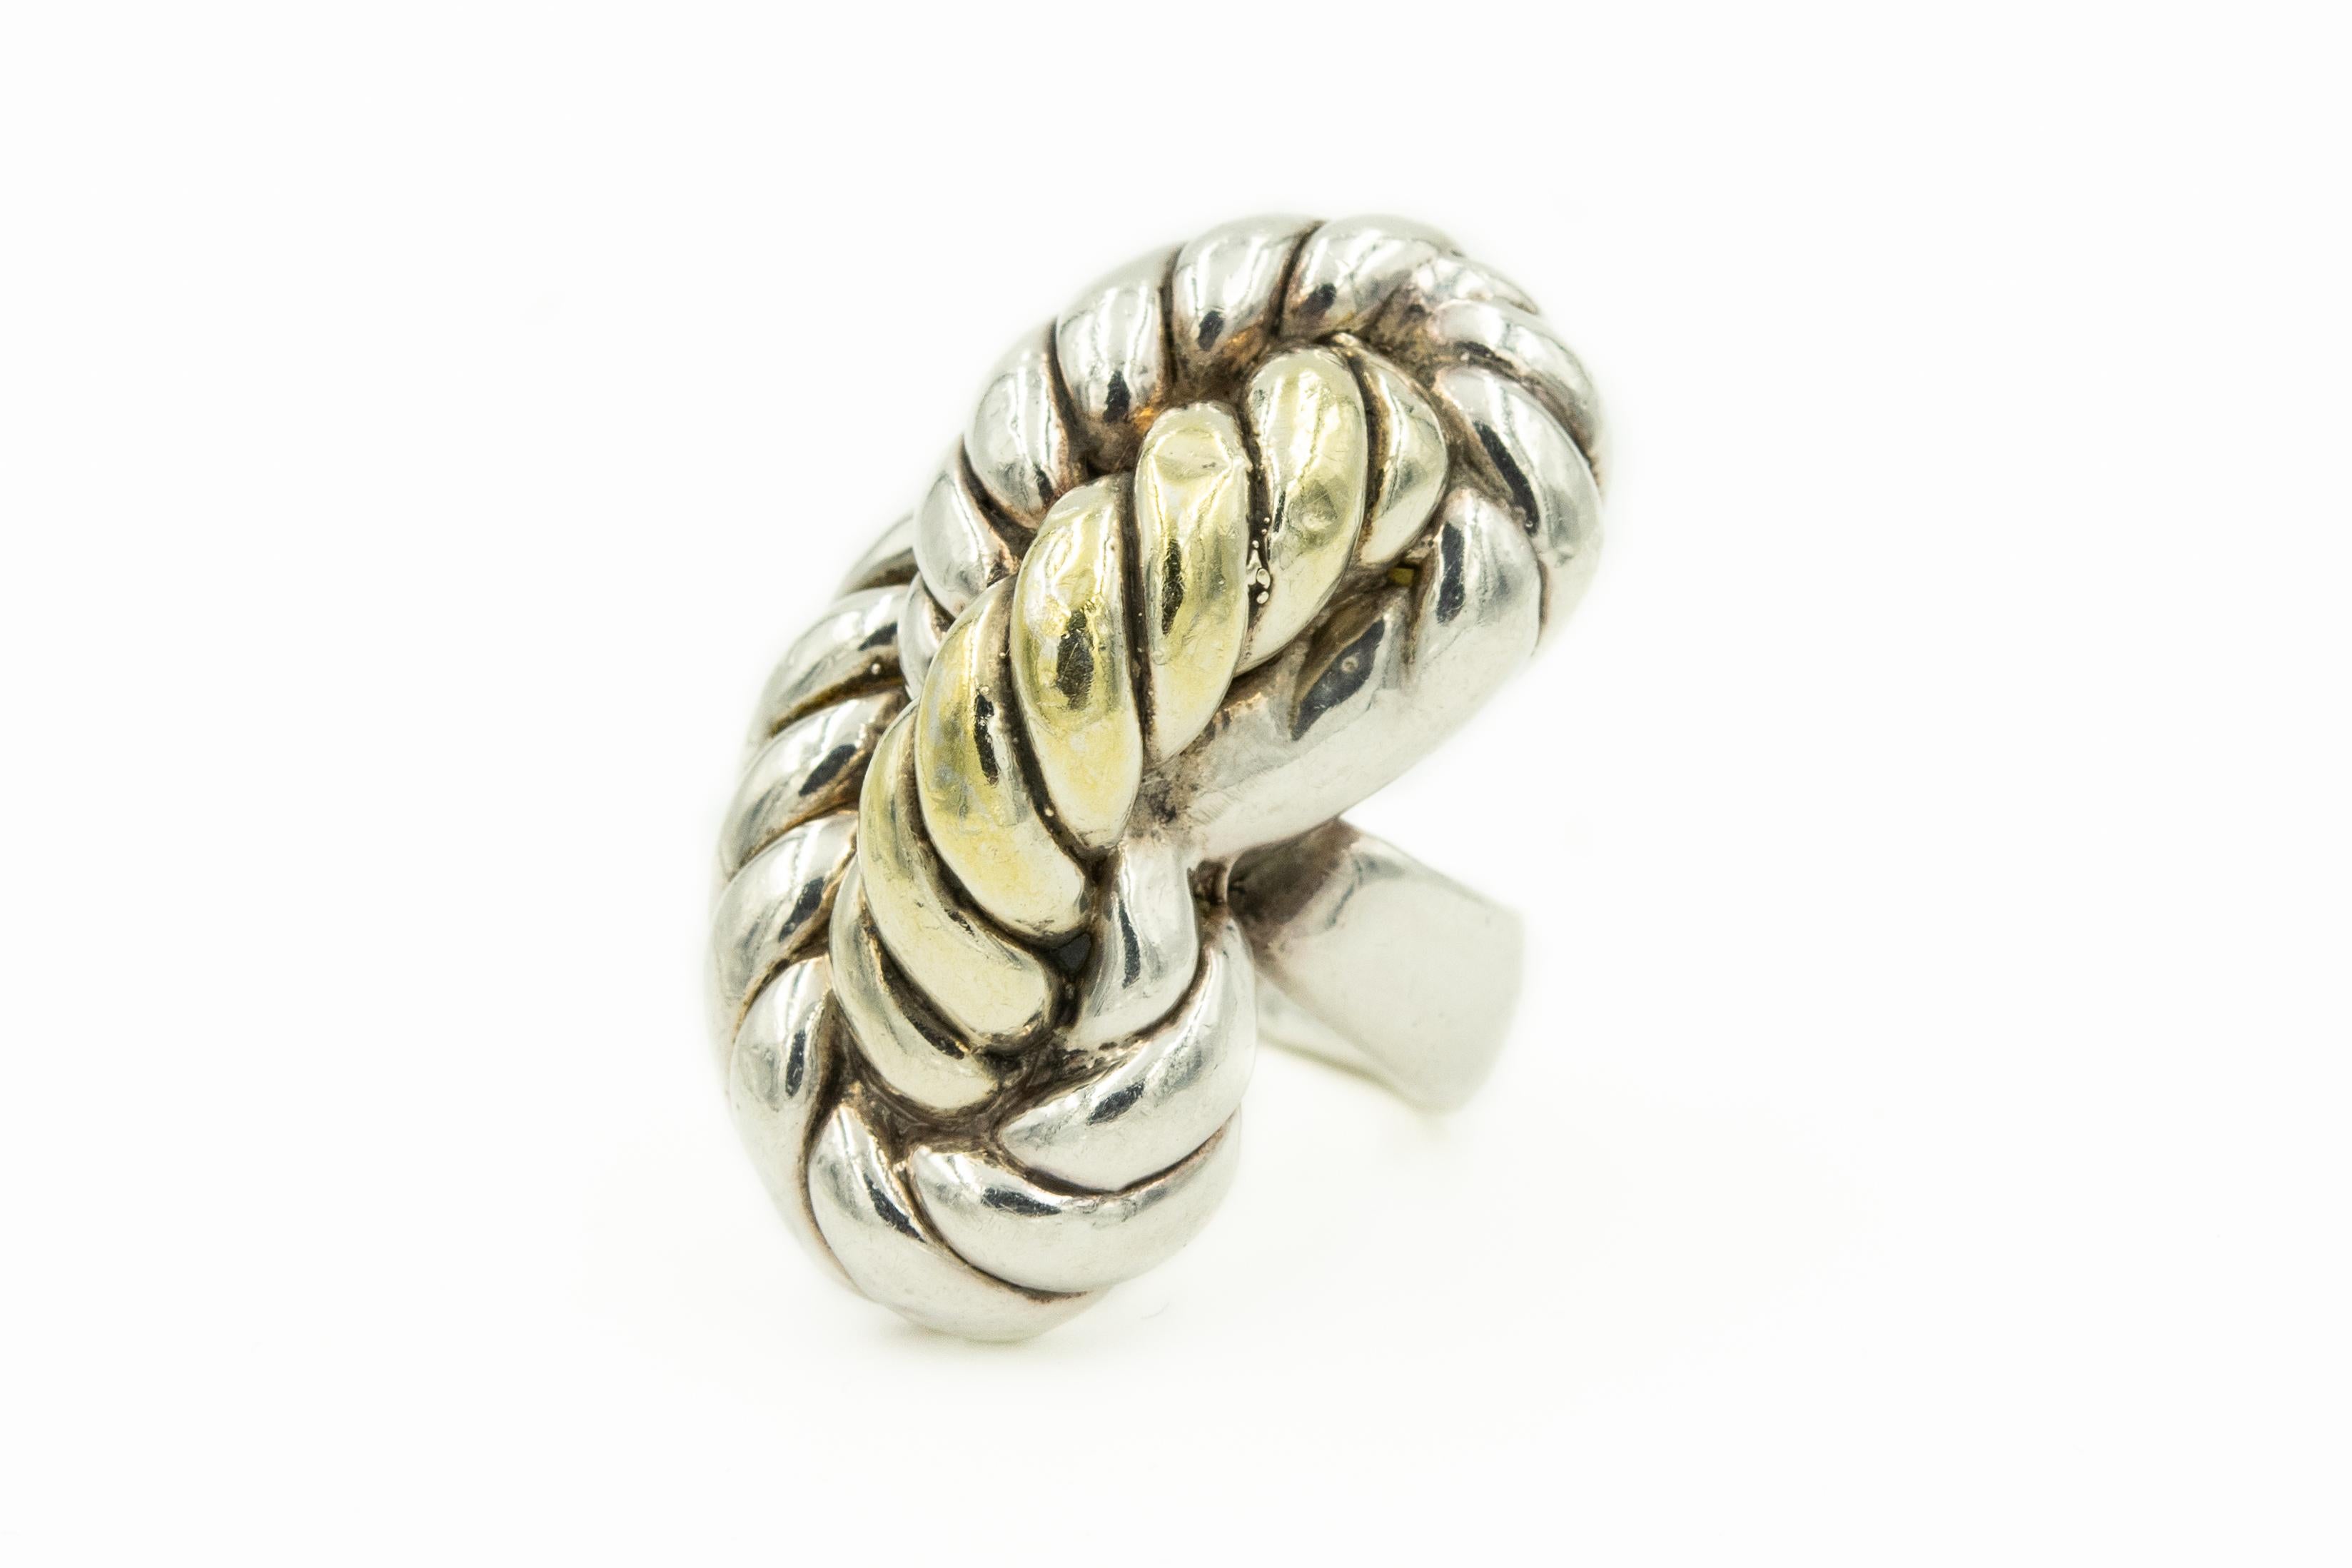 Impressive freeform design sterling silver twisted rope ring with a vermeil section running down the middle.
Marked 925
US Size 7 - it can't be sized.